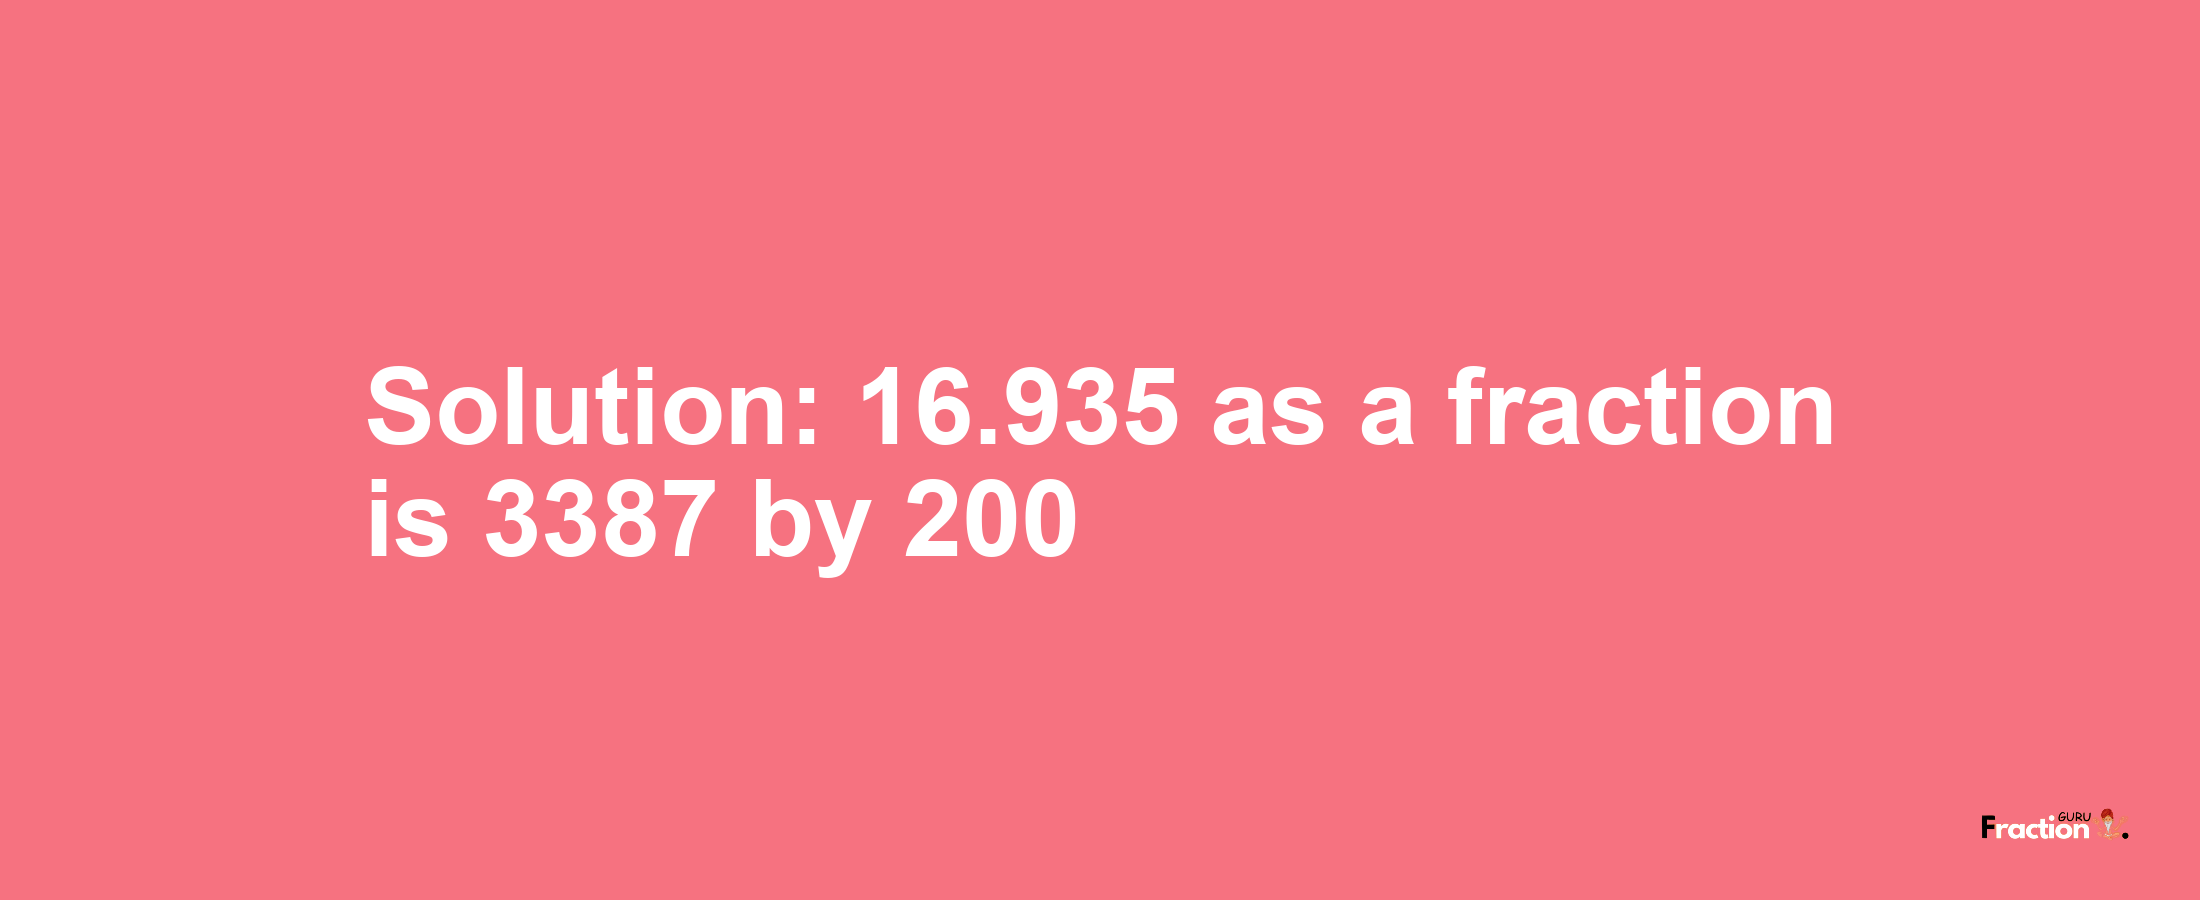 Solution:16.935 as a fraction is 3387/200